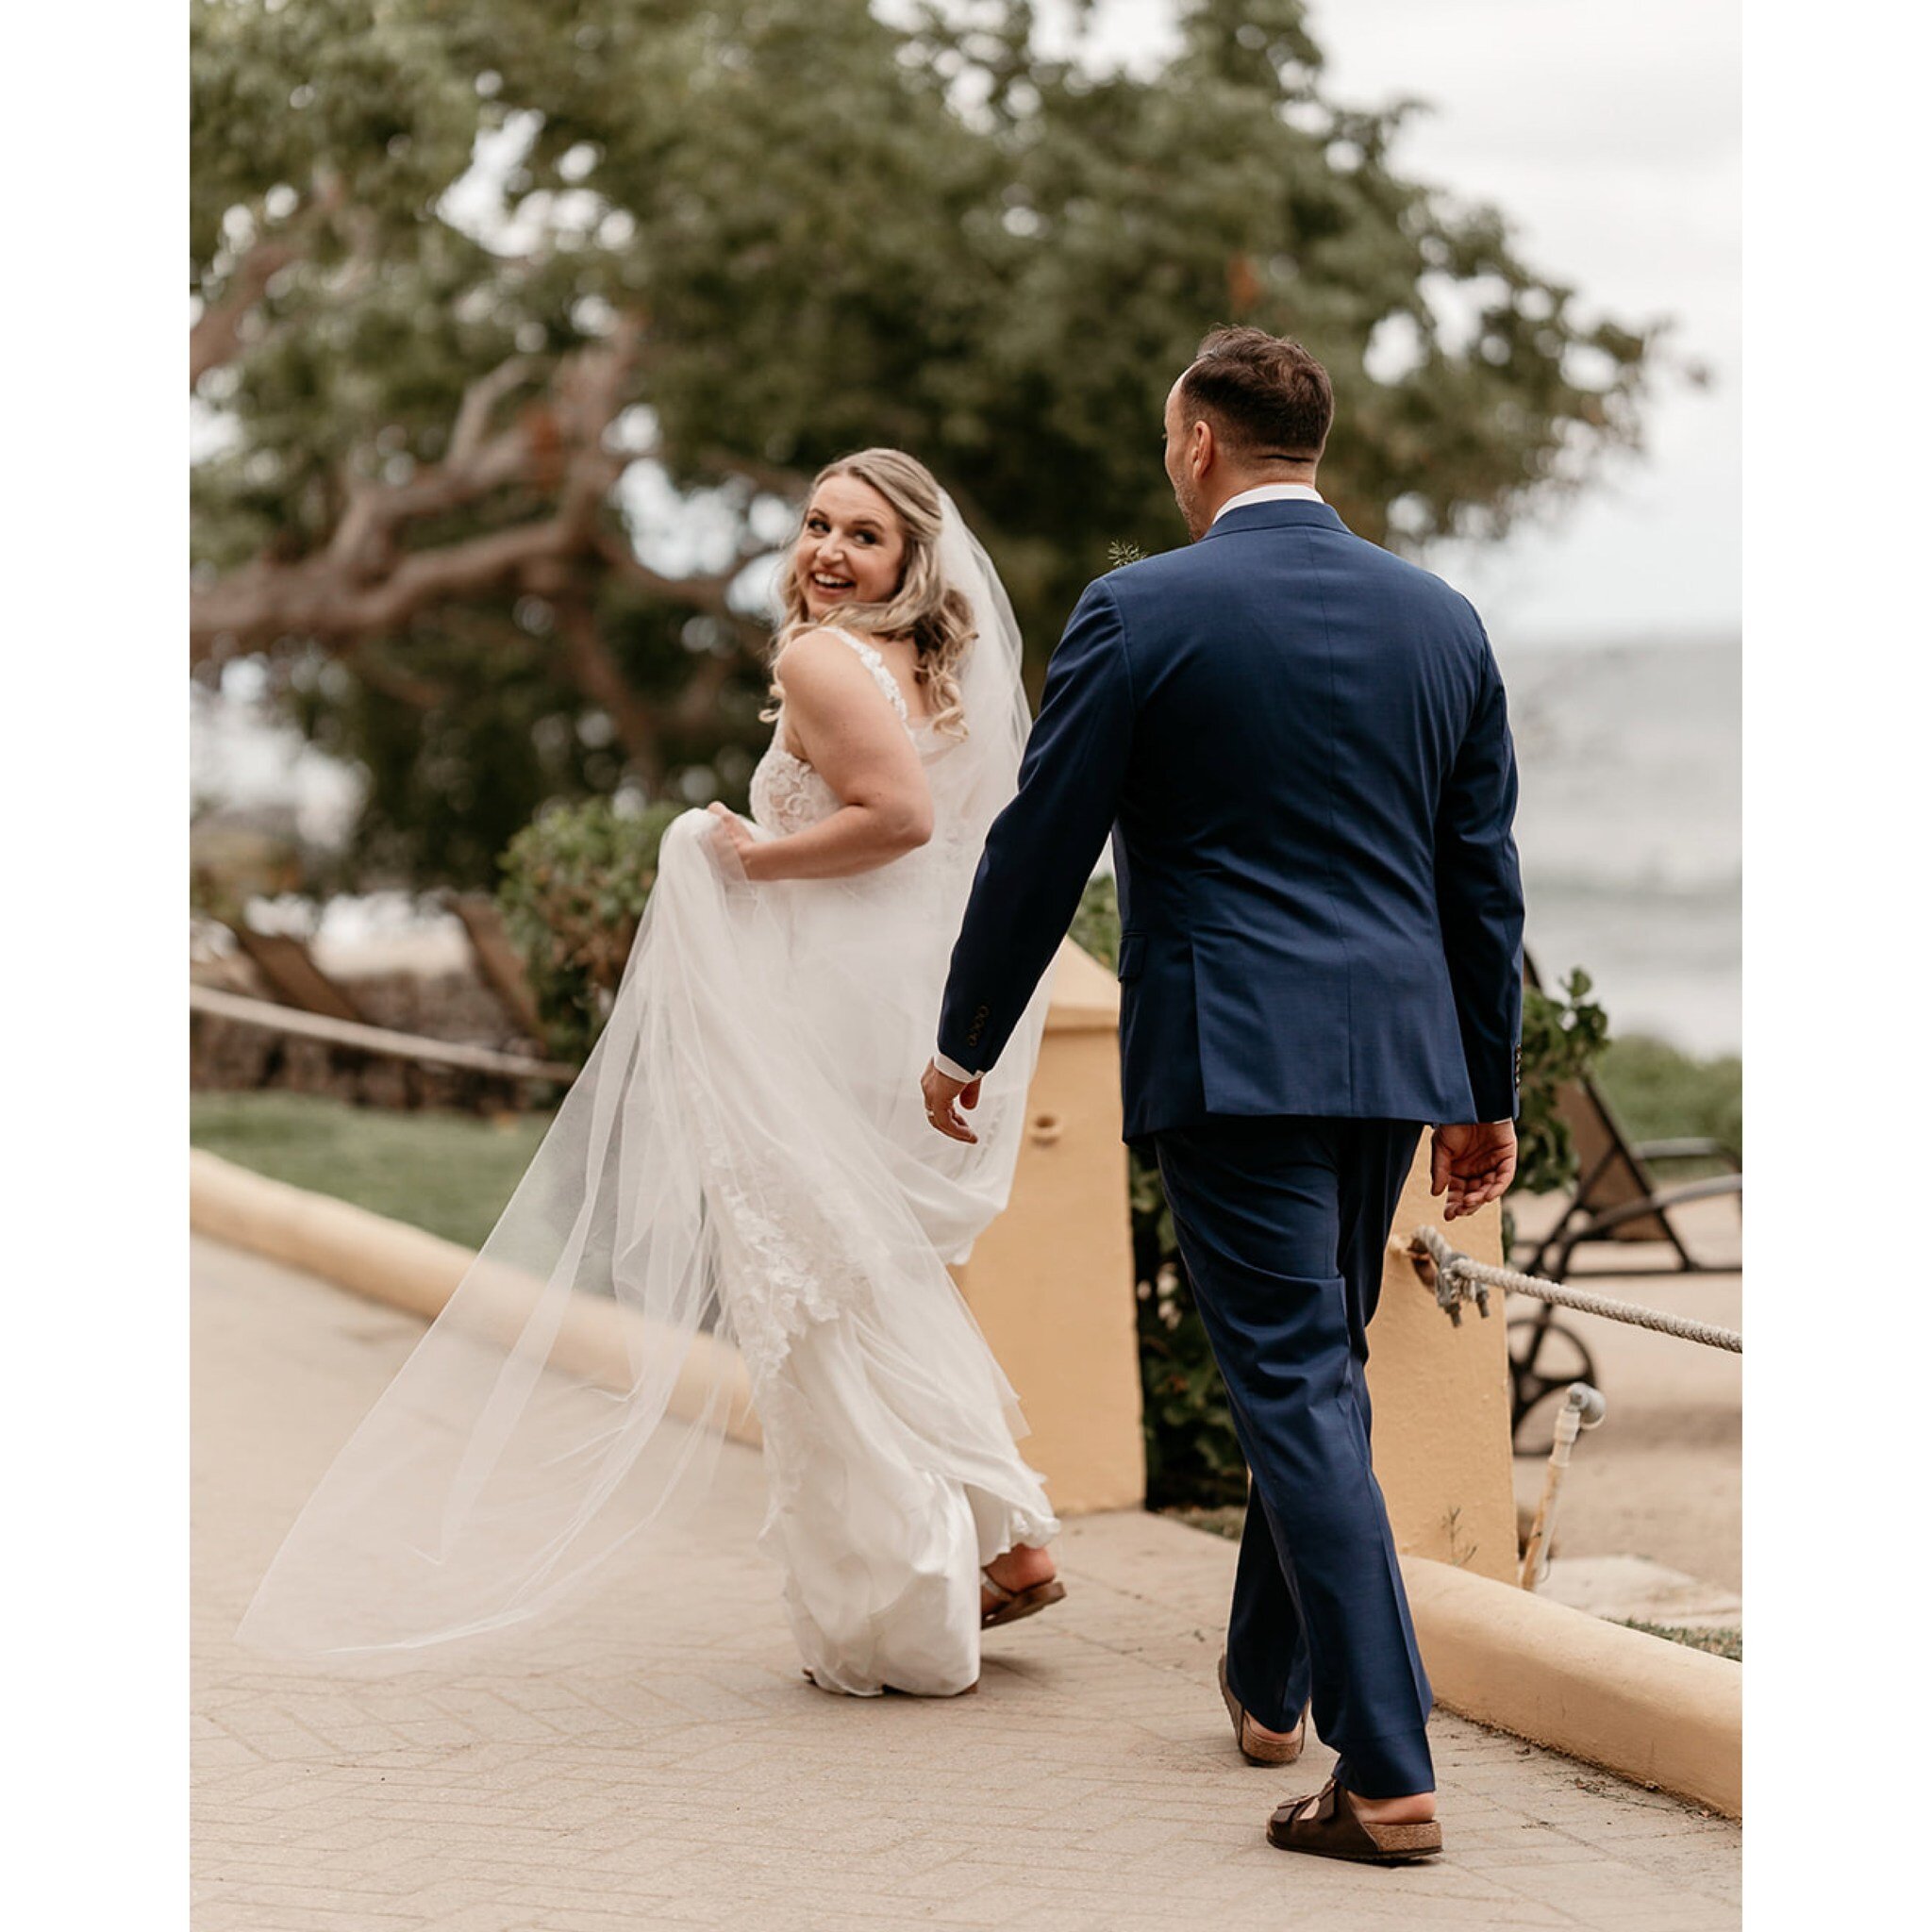 It was a dream come true to capture your tropical destination wedding at the beautiful Sayulita. 🌴✨

If you want more information about wedding packages, contact me! 📱

#weddingphotography #wedding #photography
#photoshoot #photooftheday #post #hap